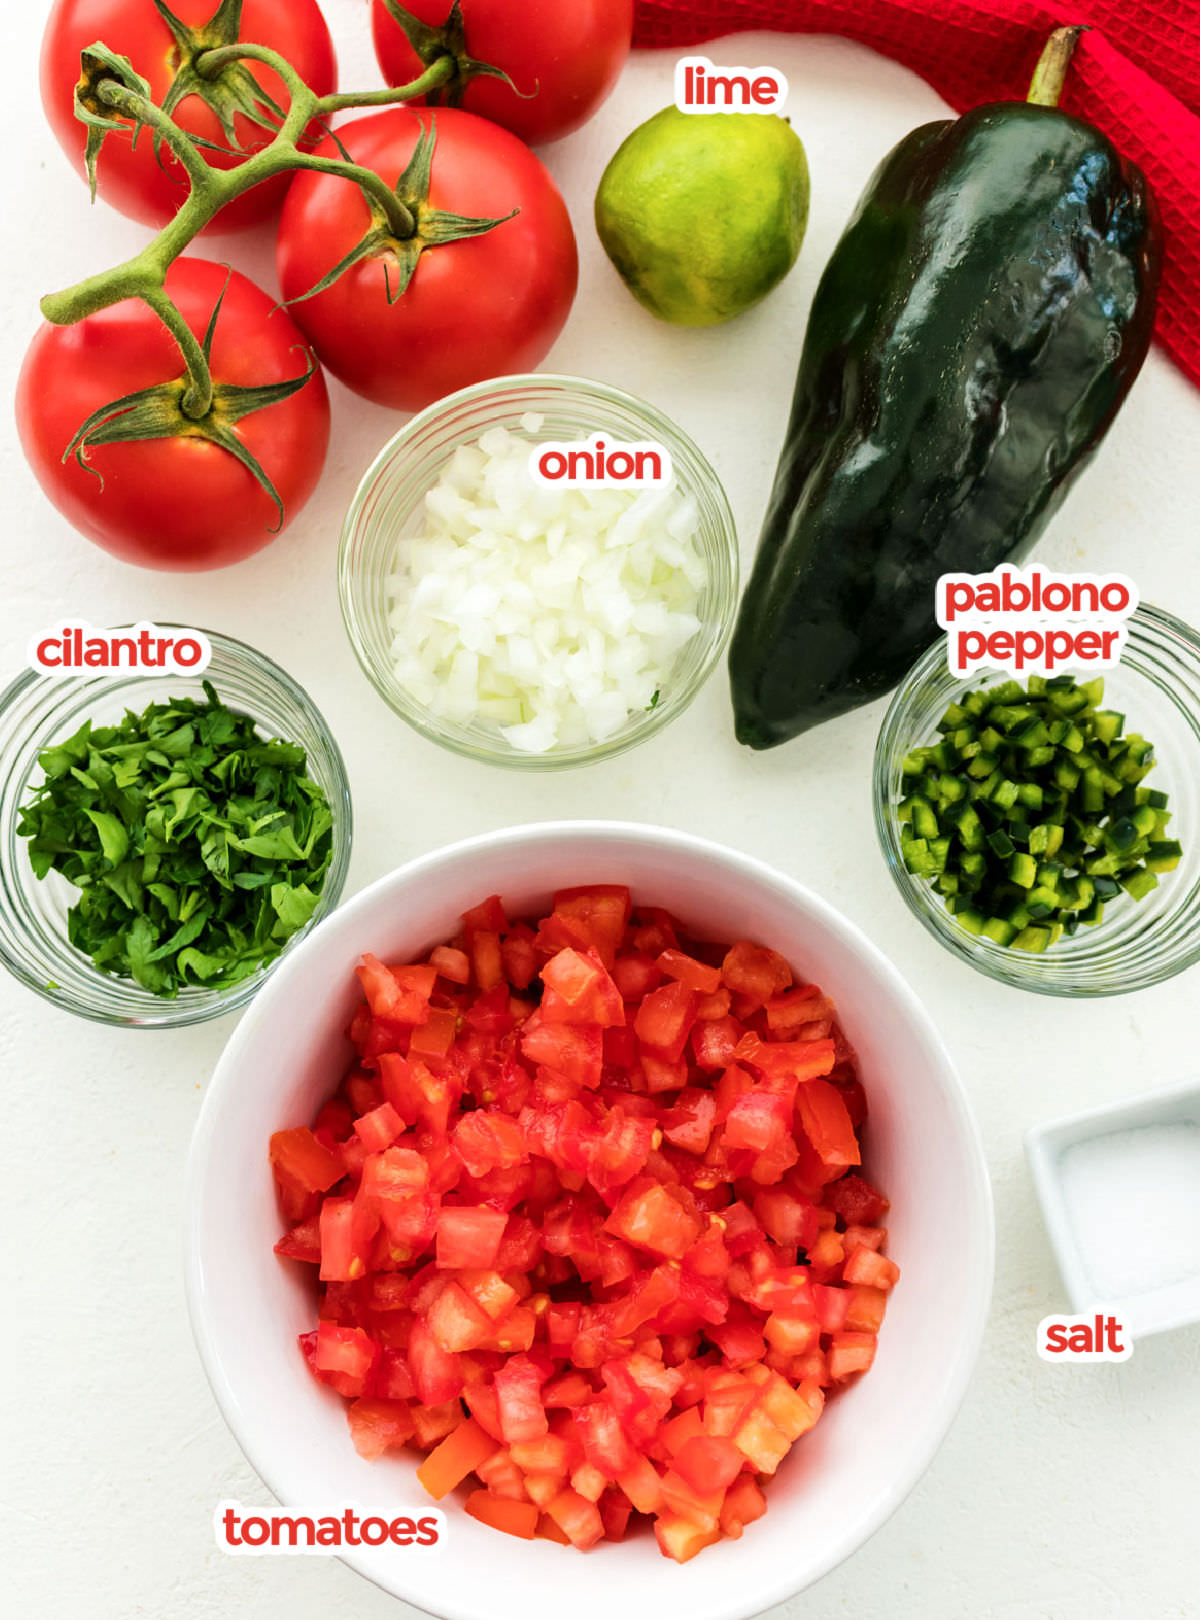 All the ingredients you will need to make Pico de Gallo including tomatoes, cilantro, onion, pablono pepper, lime and tomatoes on the vine.